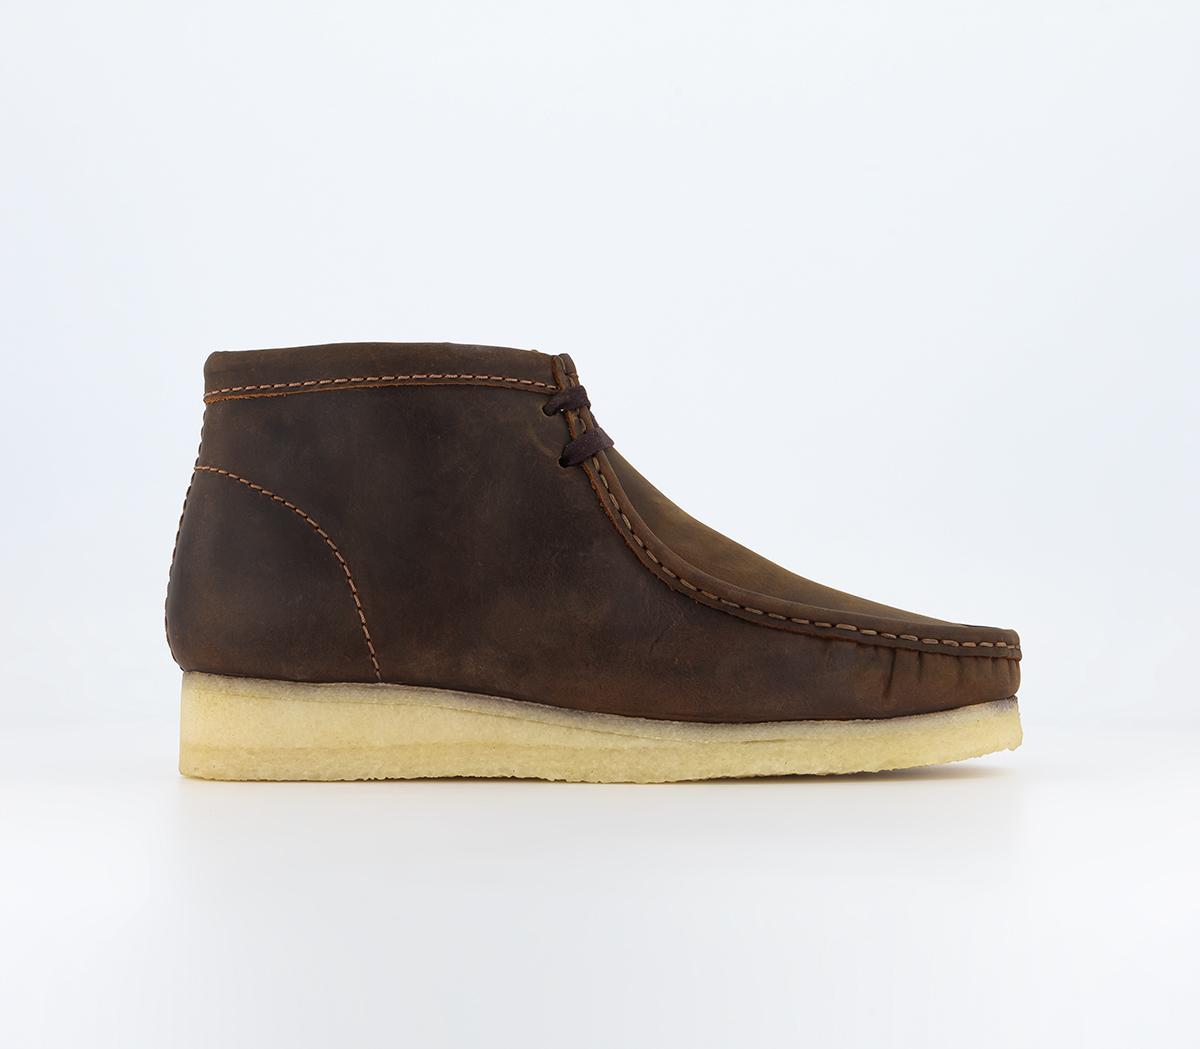 Mens Clarks Originals Wallabee Boots Beeswax – OFFCUTS SHOES by OFFICE